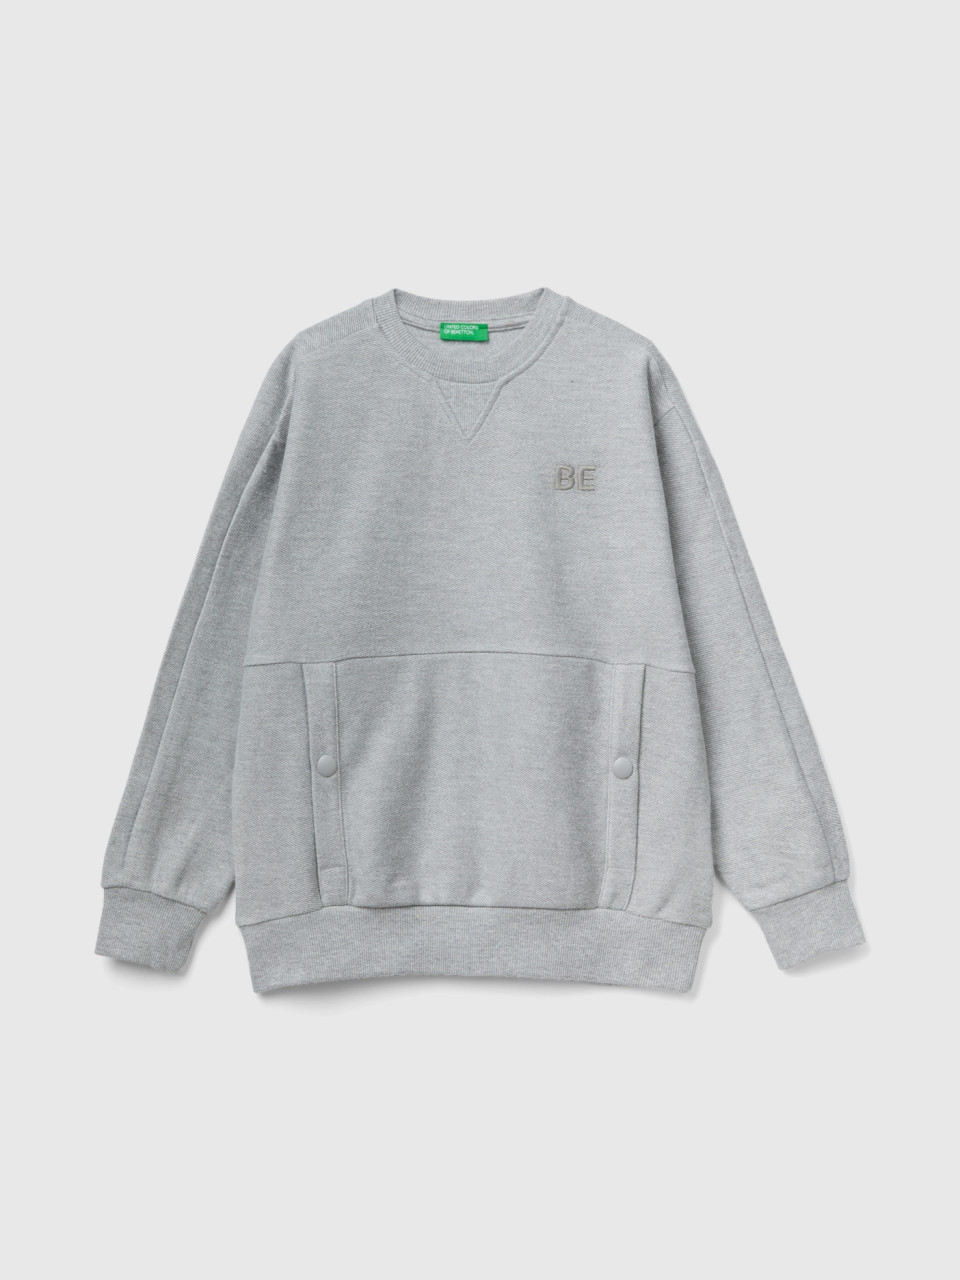 Benetton, Sweatshirt With Pockets And be Embroidery, Gray, Kids